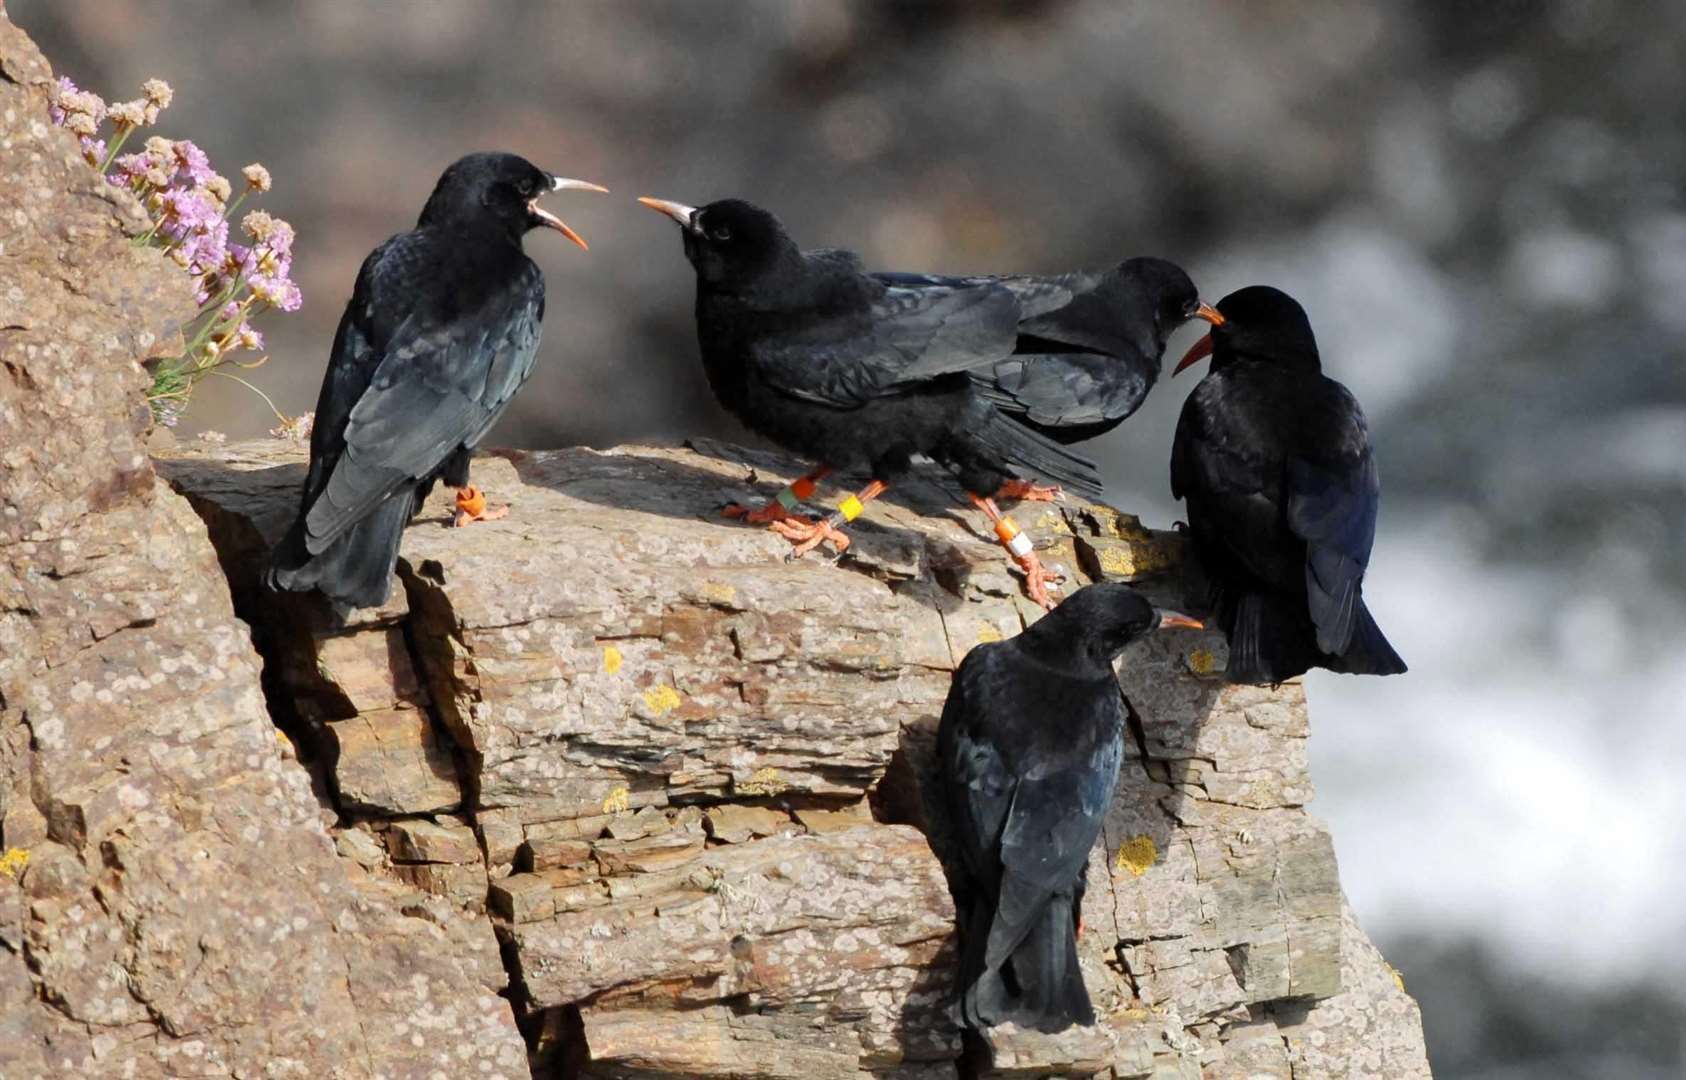 Other projects hope to re-introduce chough birds to the white cliffs of Dover (Barry Batchelor/PA)